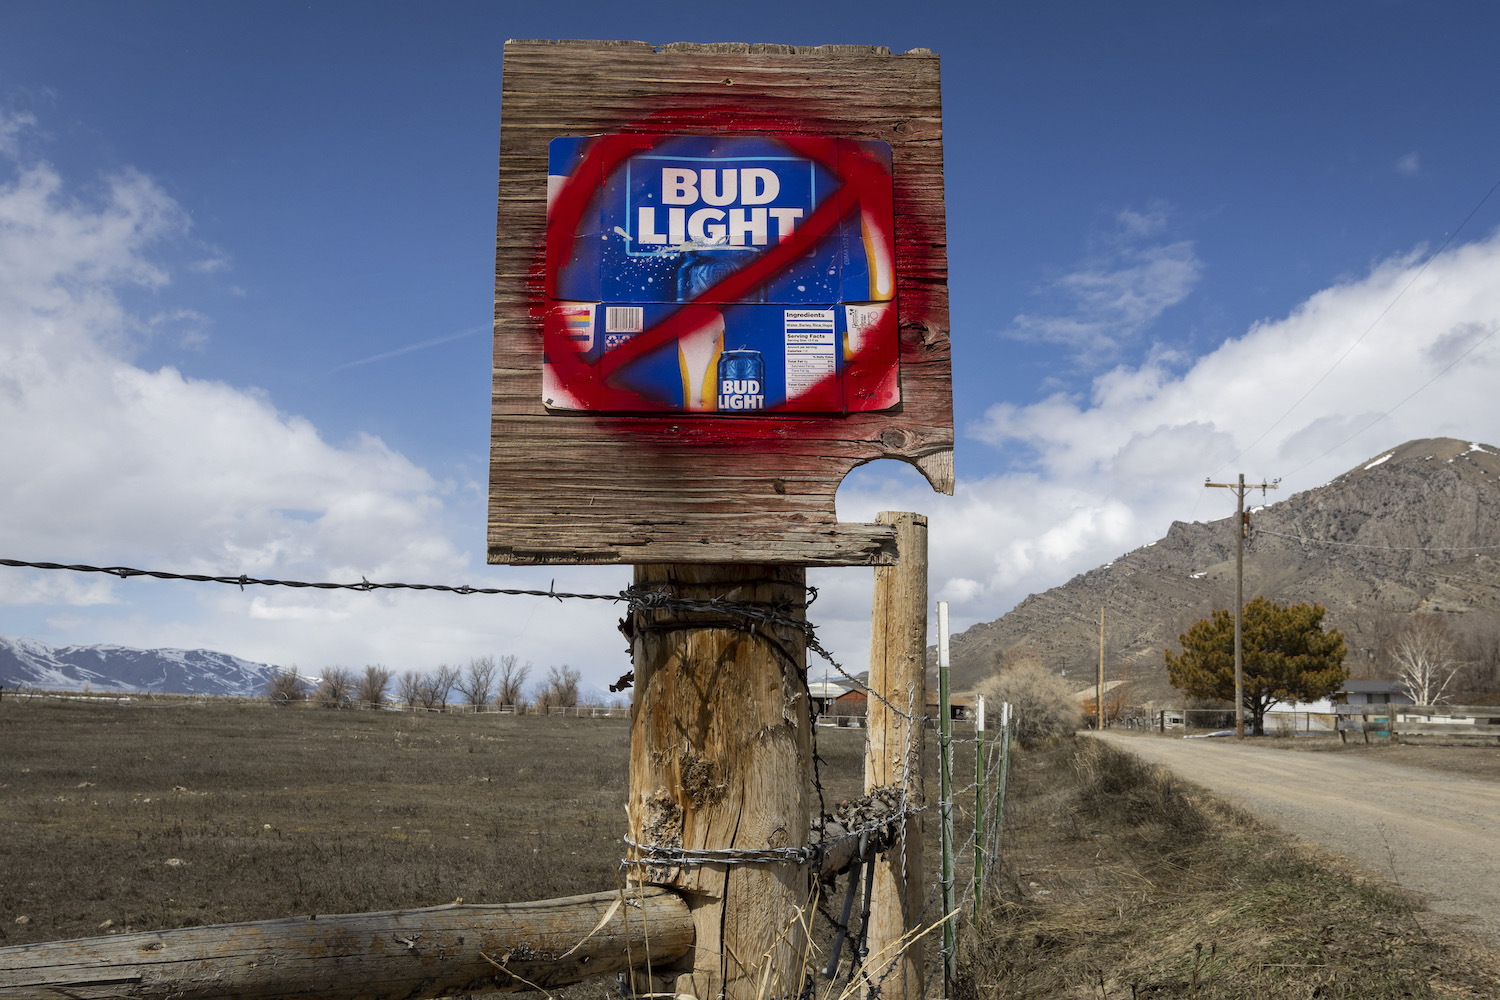 A sign disparaging Bud Light along a country road in Arco, Idaho